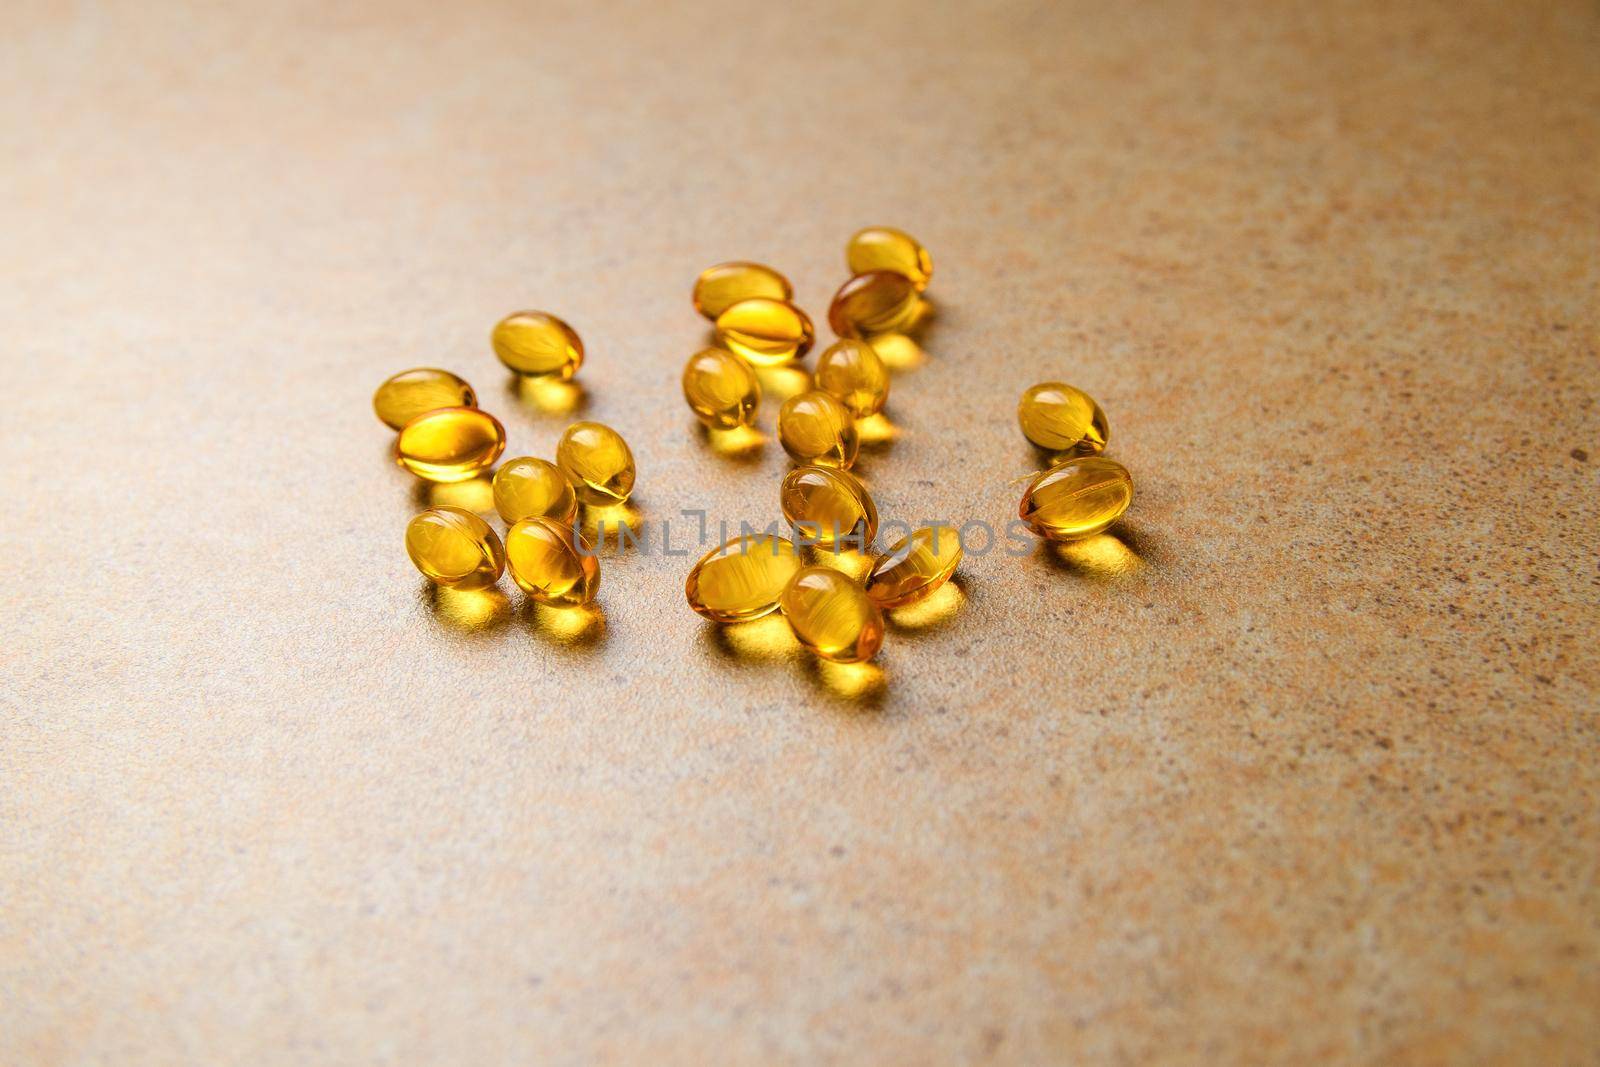 Vitamin D and fish oil capsules randomly lie on the background